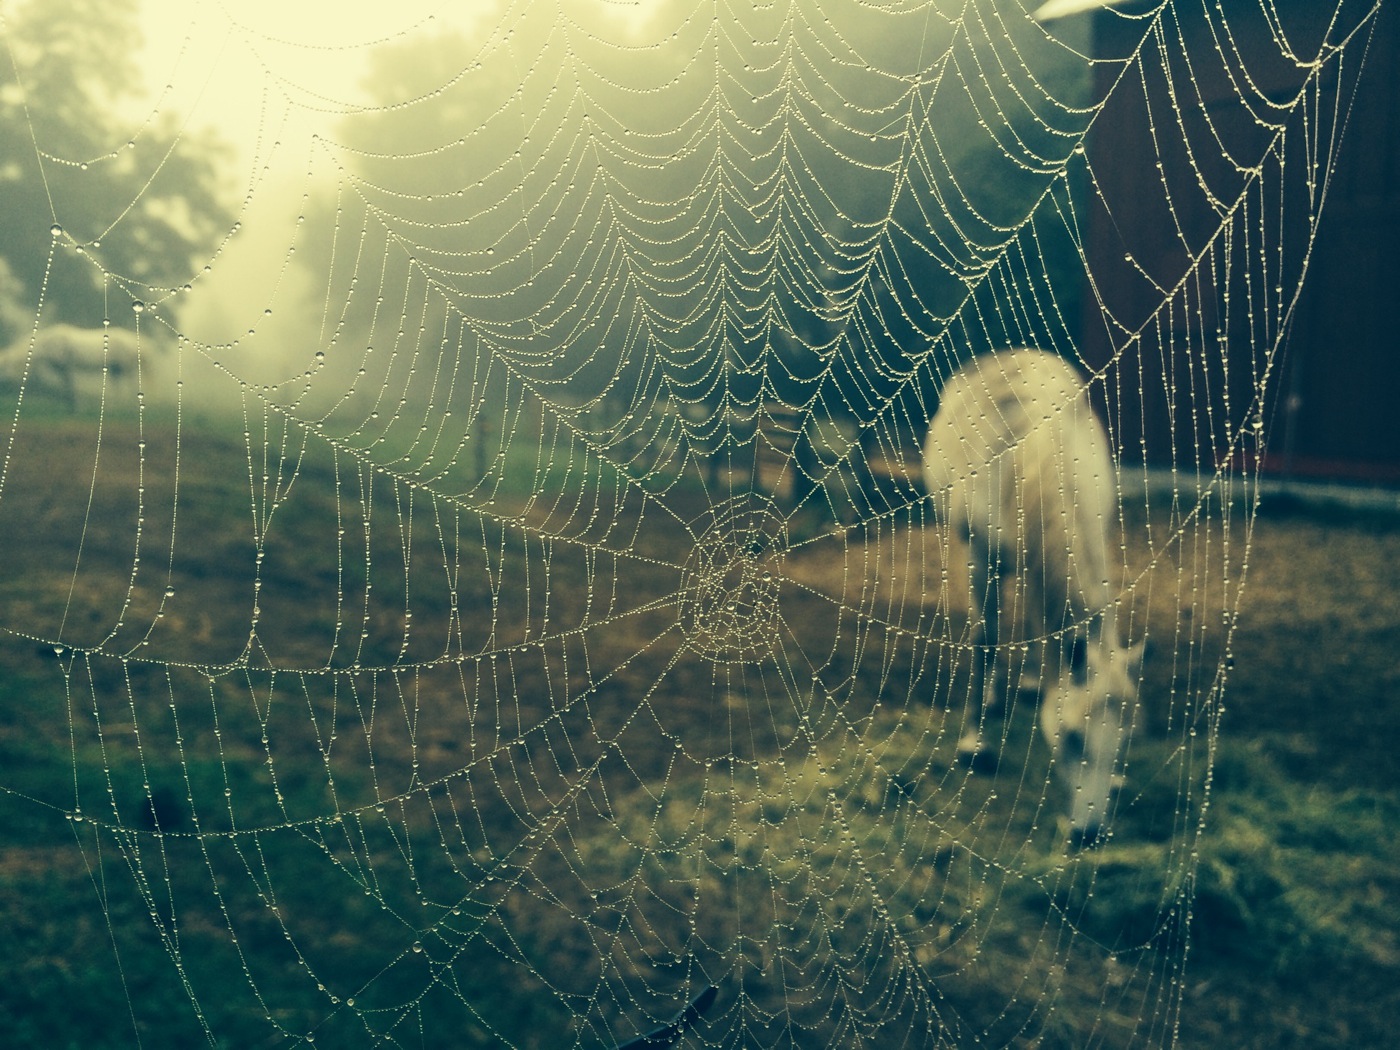 image of foggy morning dewy spider web in front of a horse